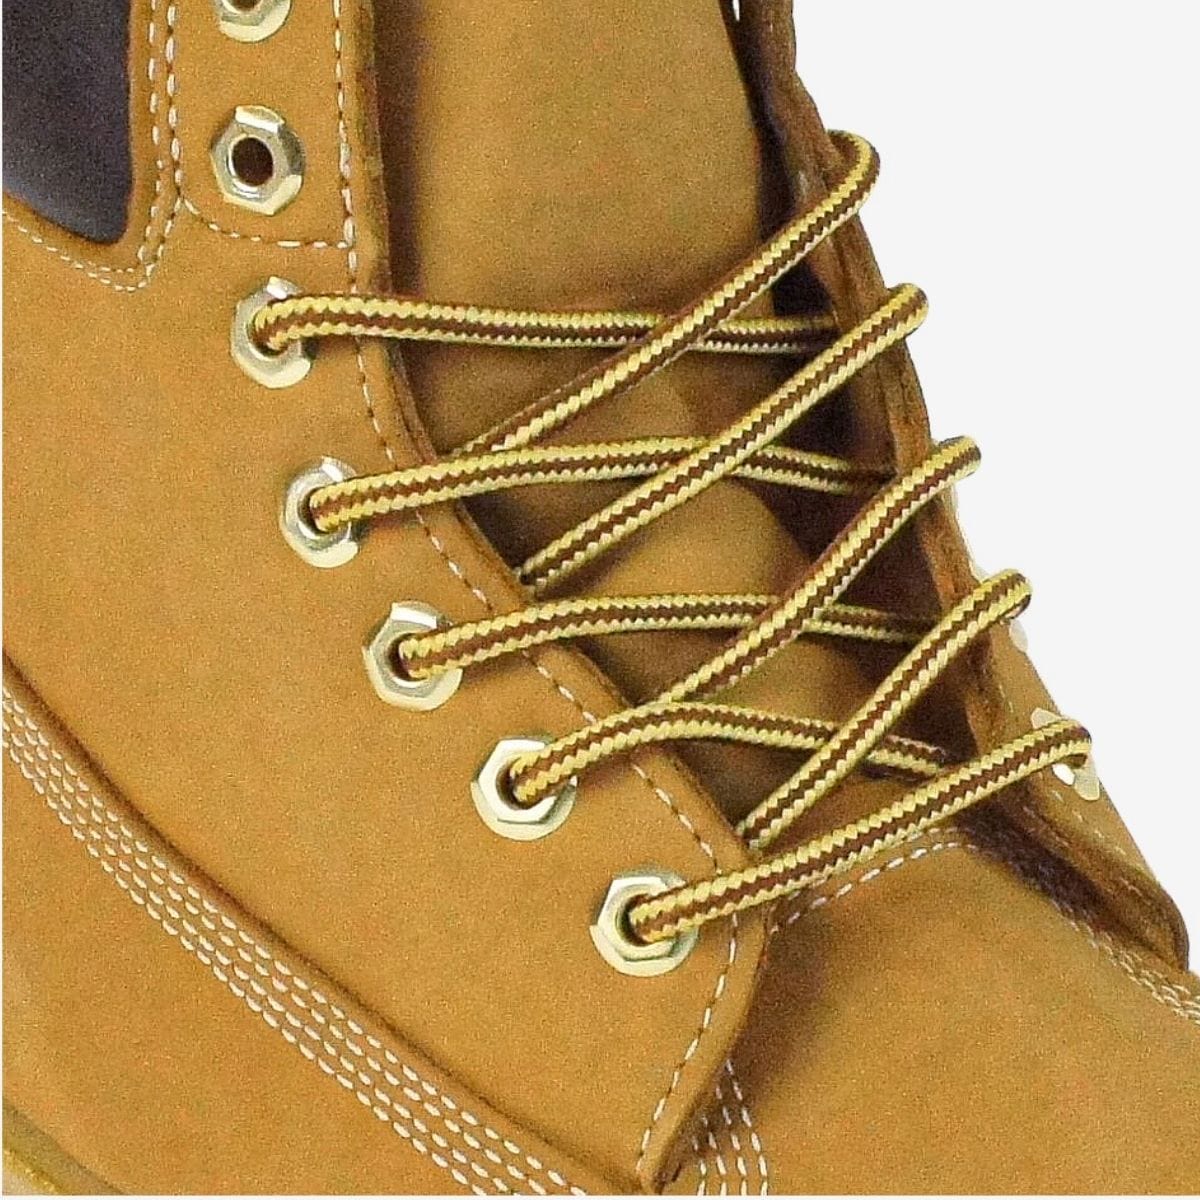 shop-round-shoelaces-online-in-deep-brown-and-yellow-for-boots-sneakers-and-running-shoes